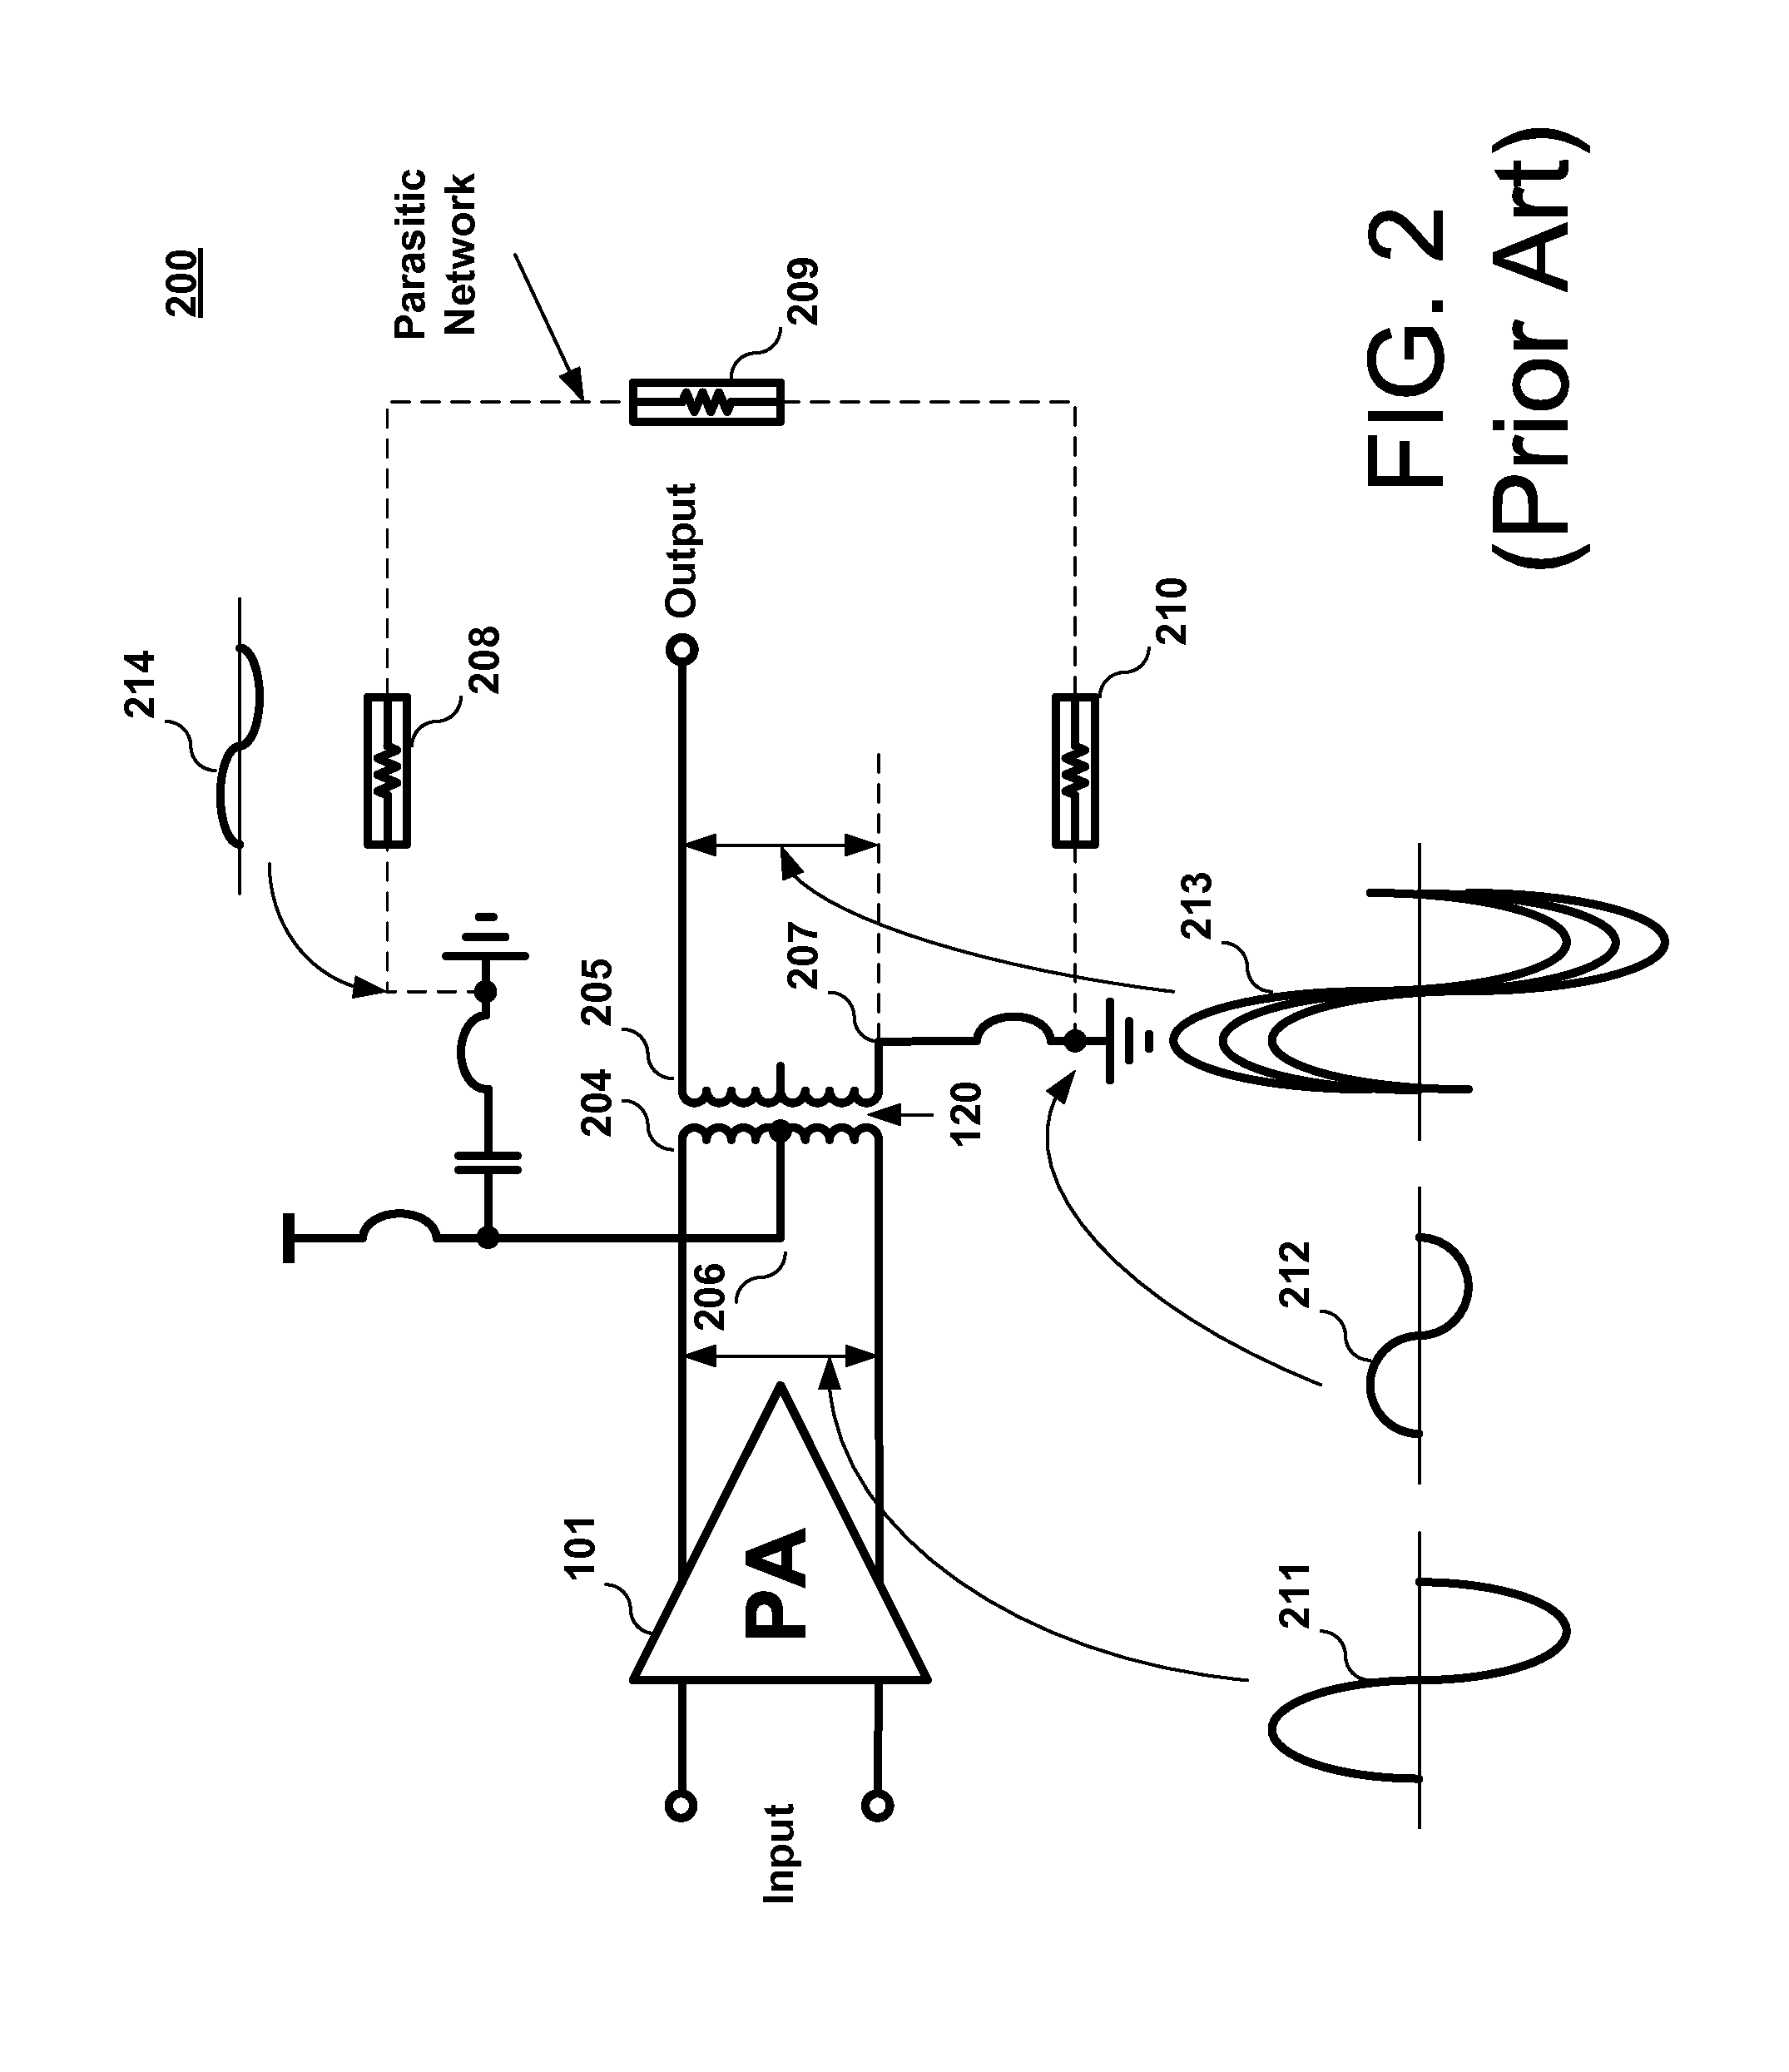 Balun function with reference enhancement in single-ended port